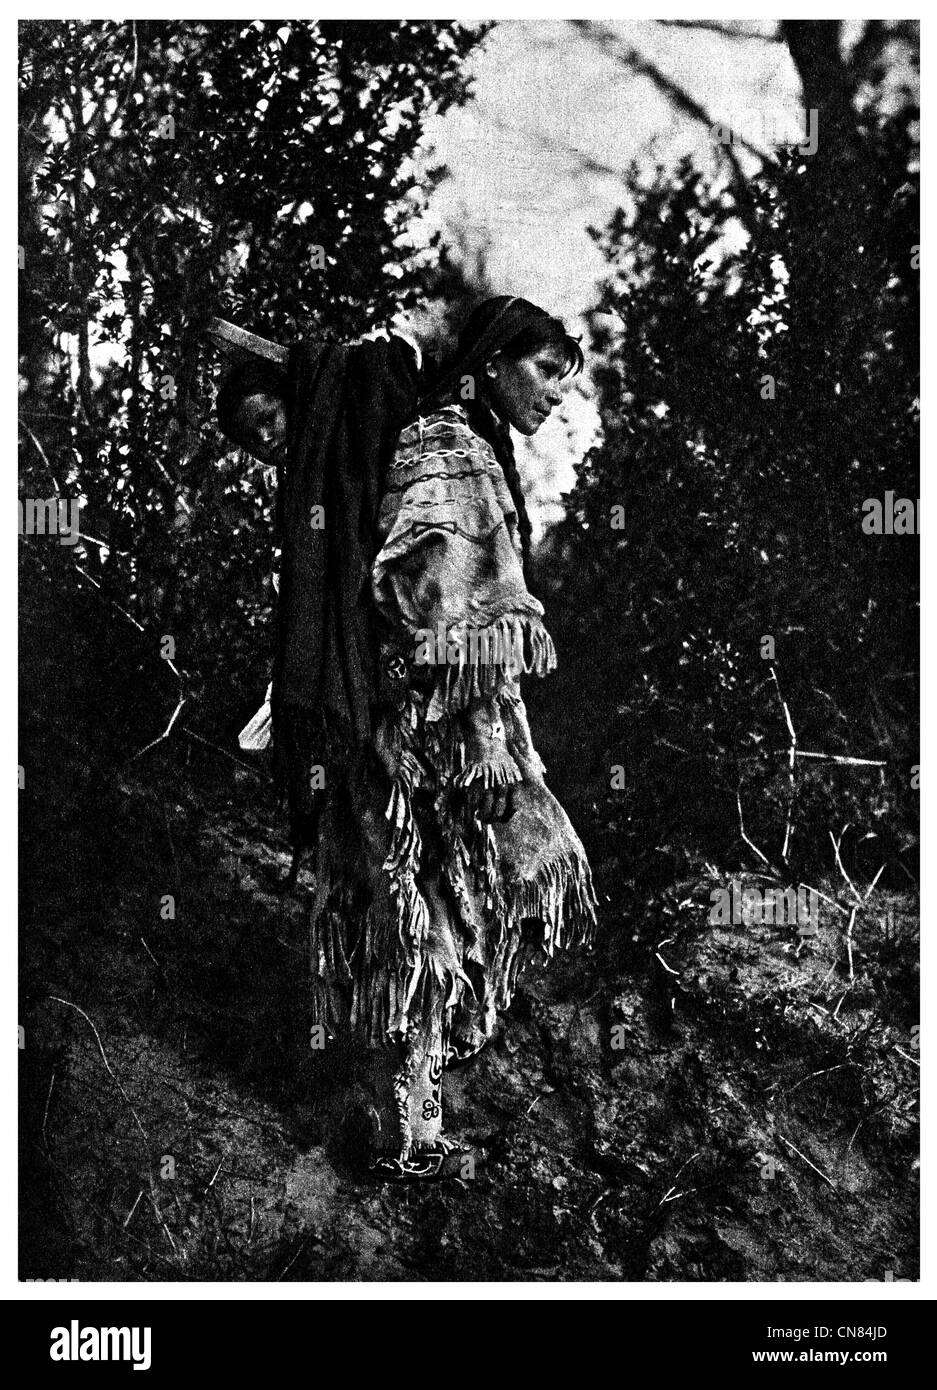 First published 1917 Liitle Camera Cheif Ojibway Tribe Northern Minnesota Stock Photo